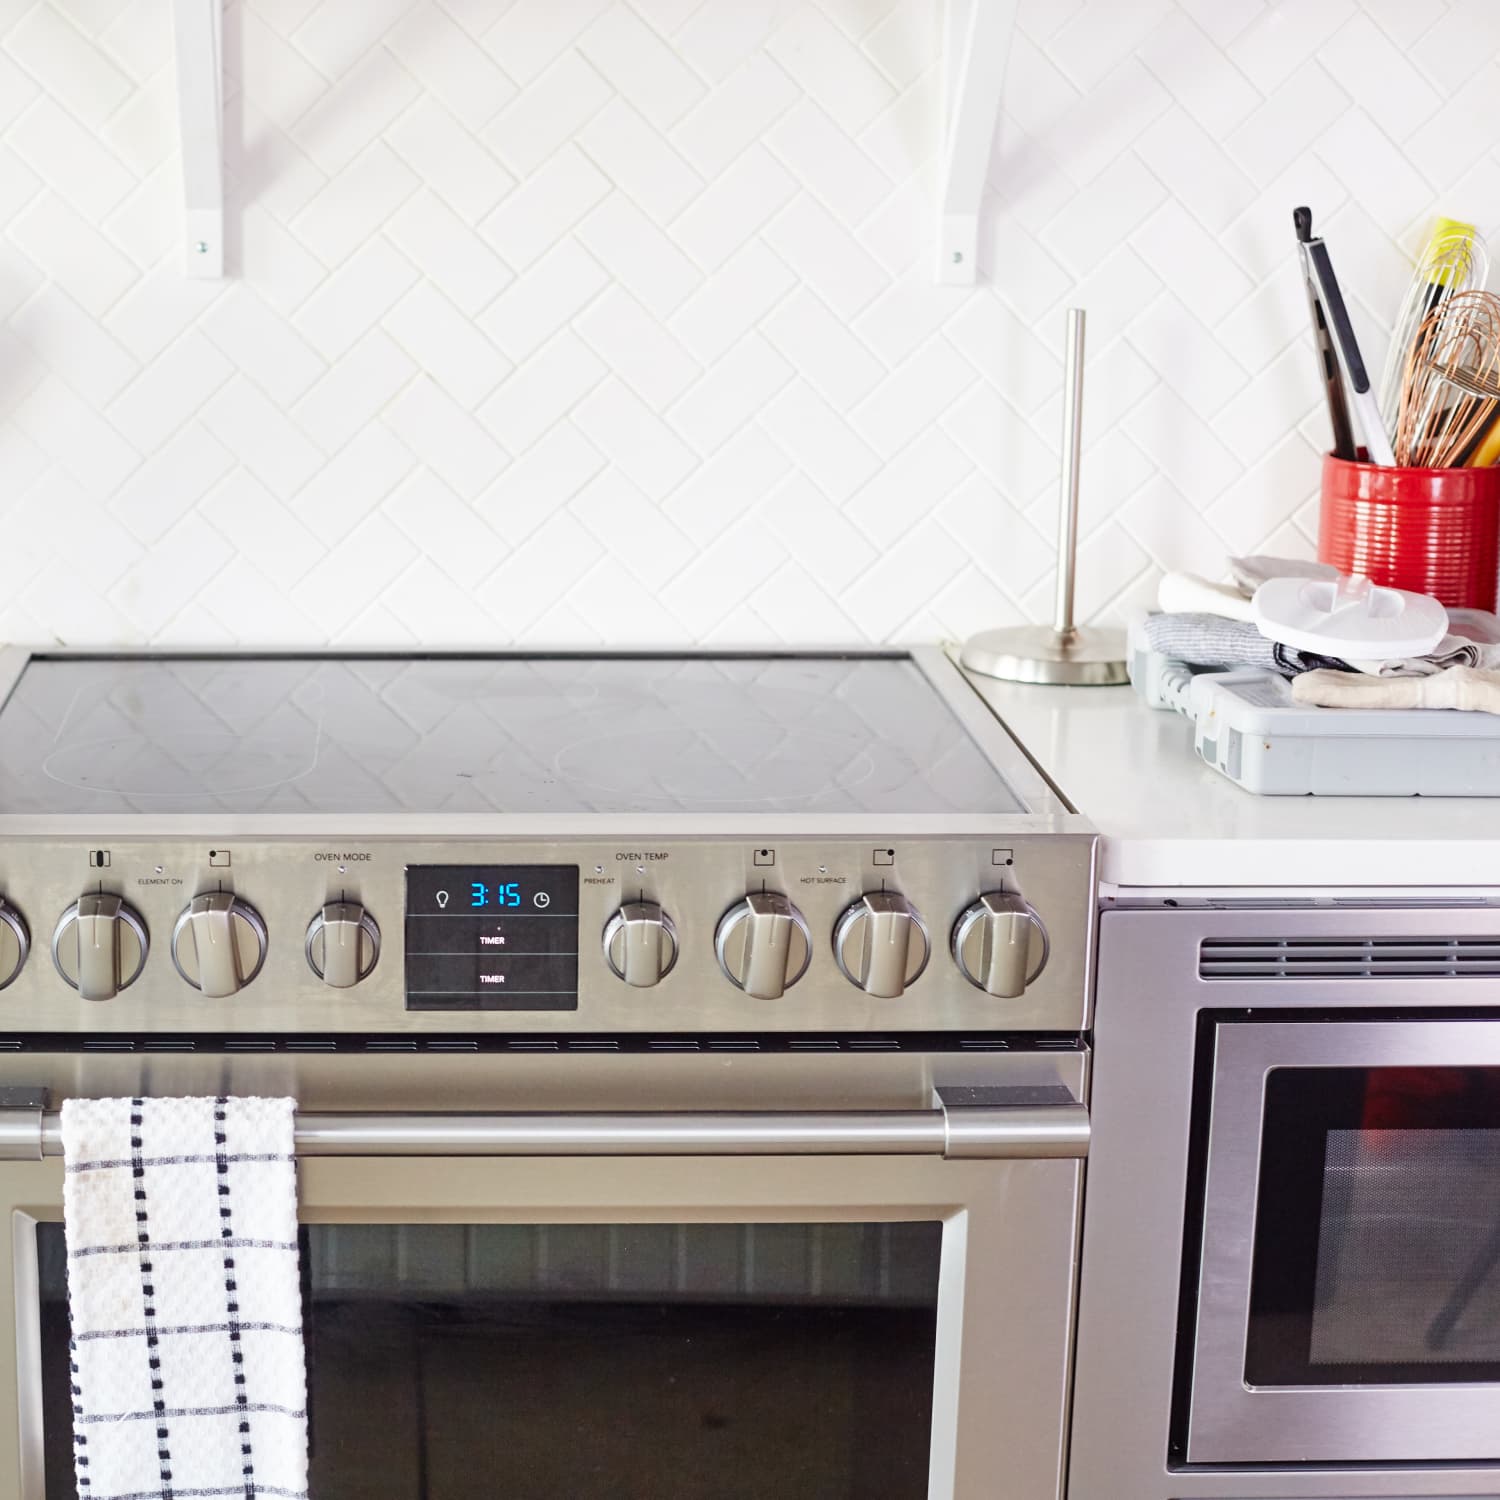 conduction stove top